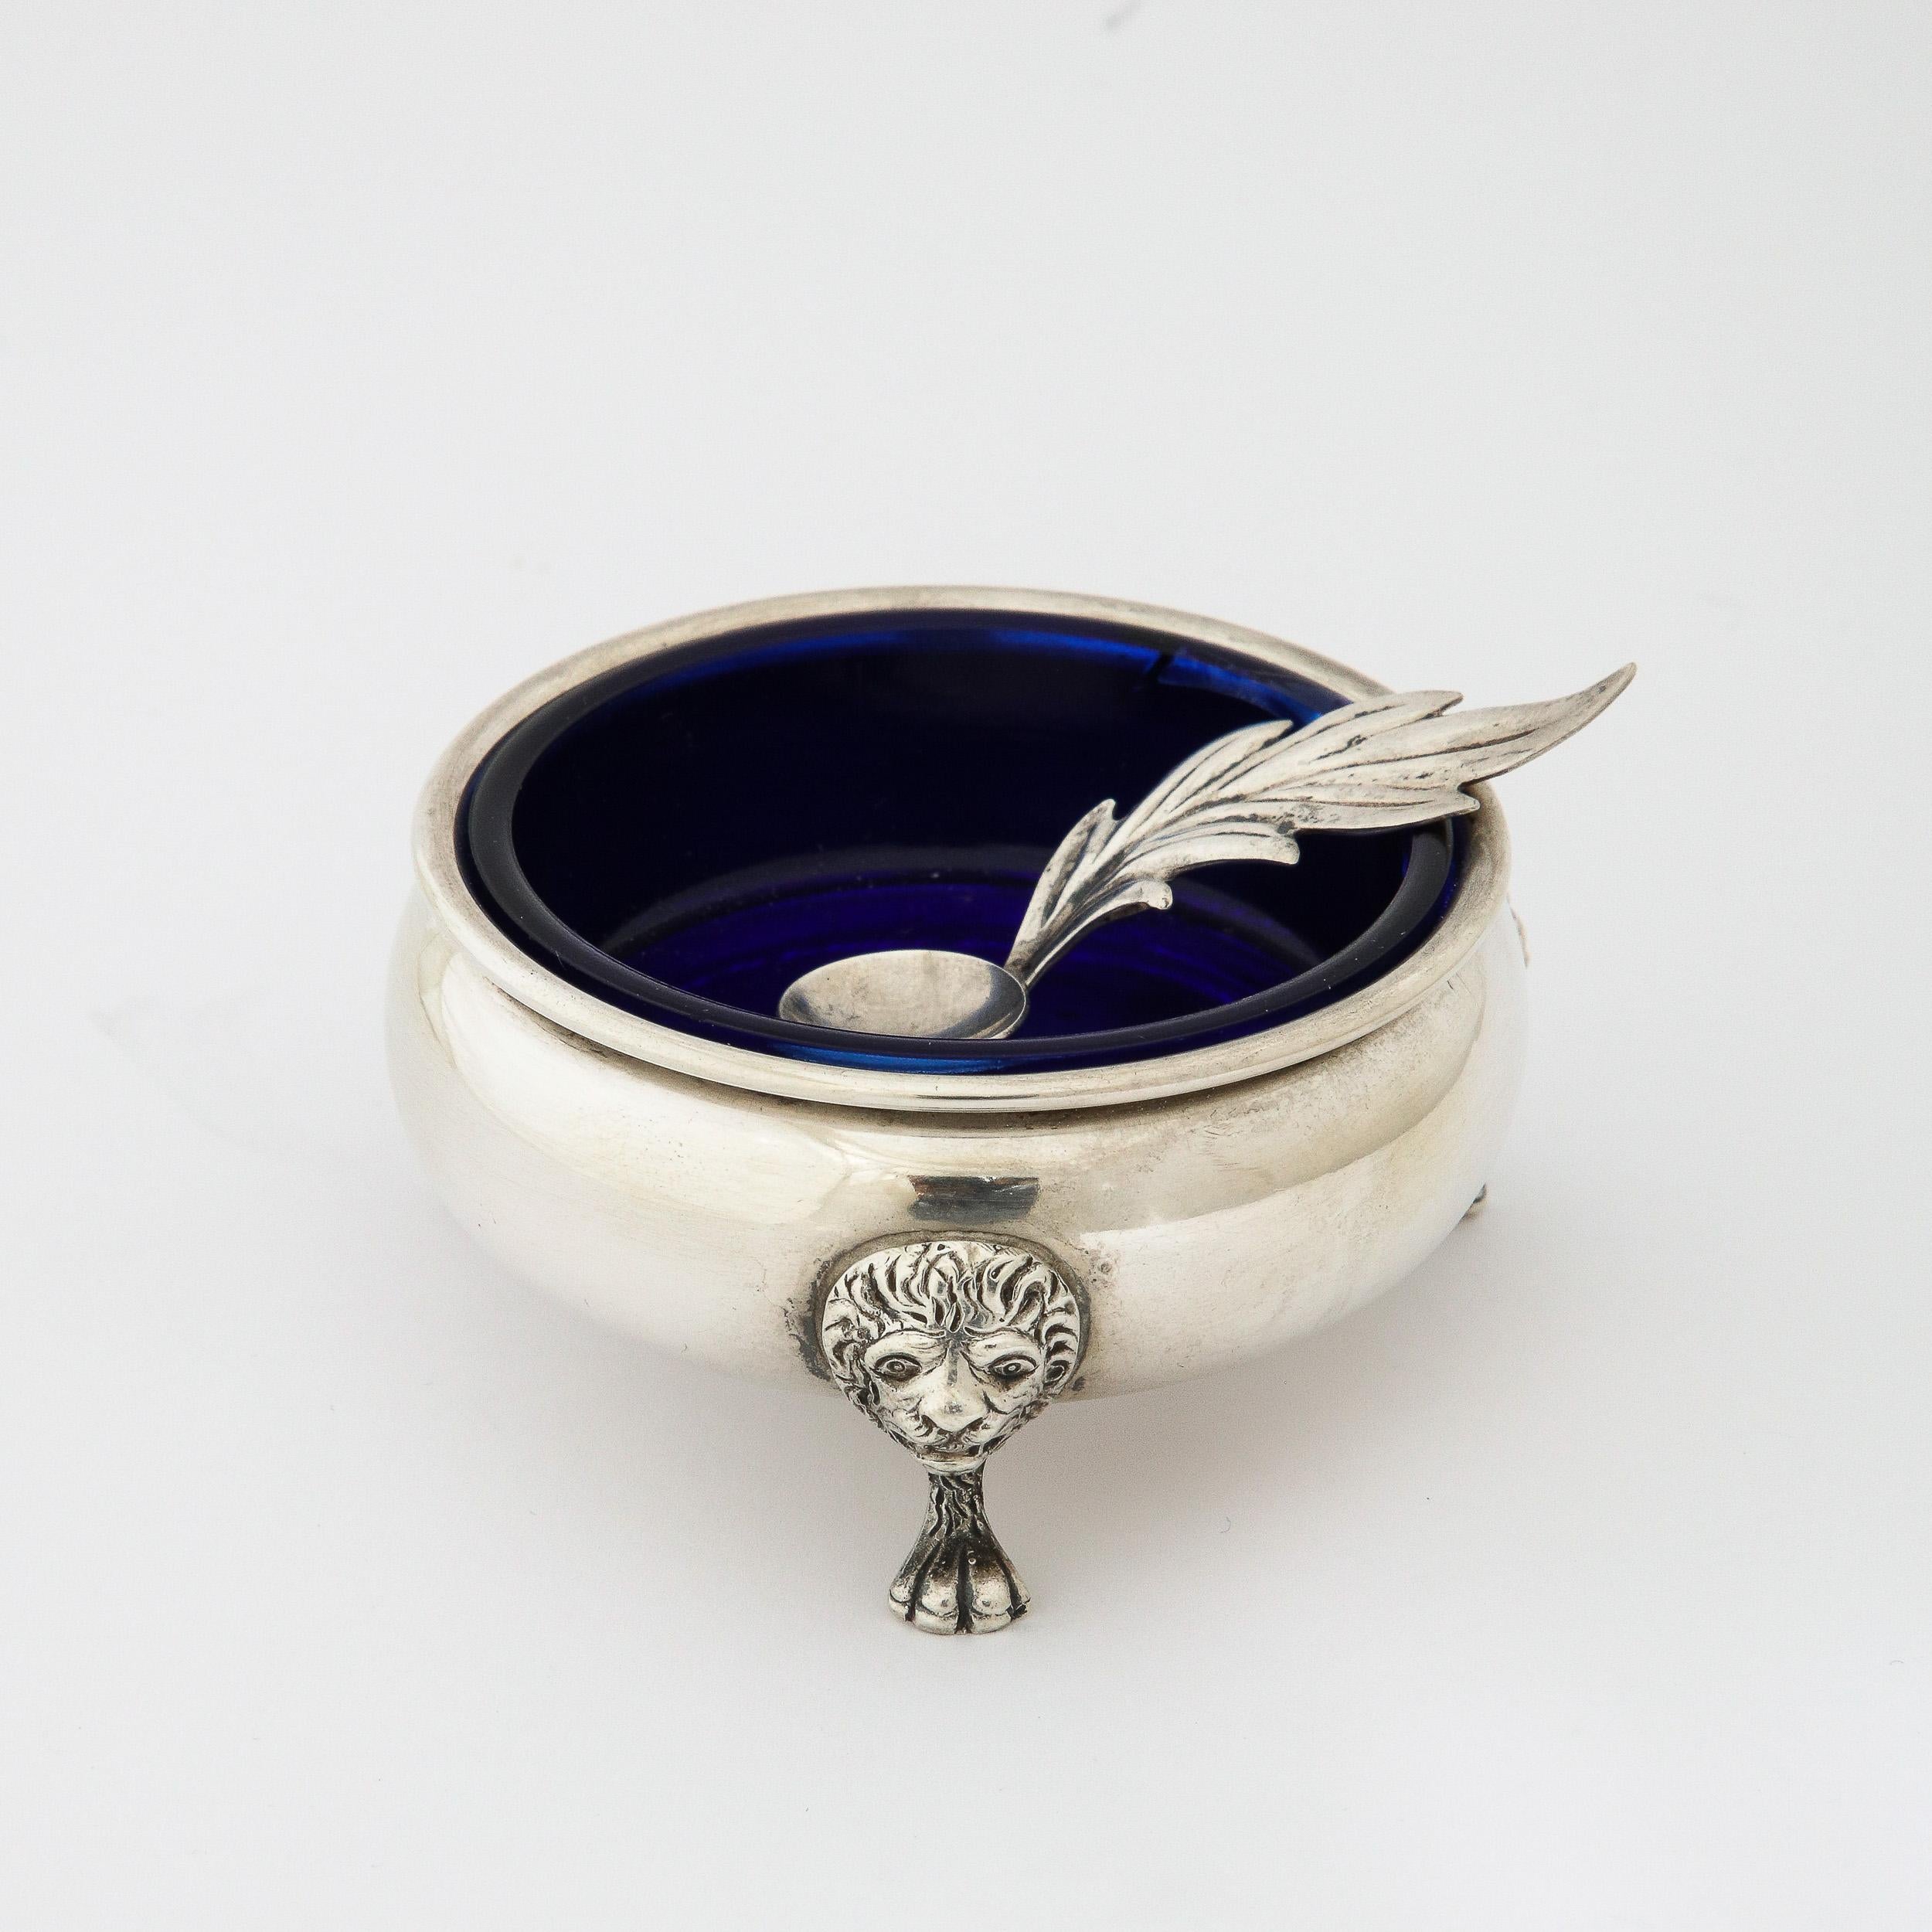 Neoclassical Revival Elegant Sterling Silver Salt Cellar by Aniston with Lion and Paw Feet